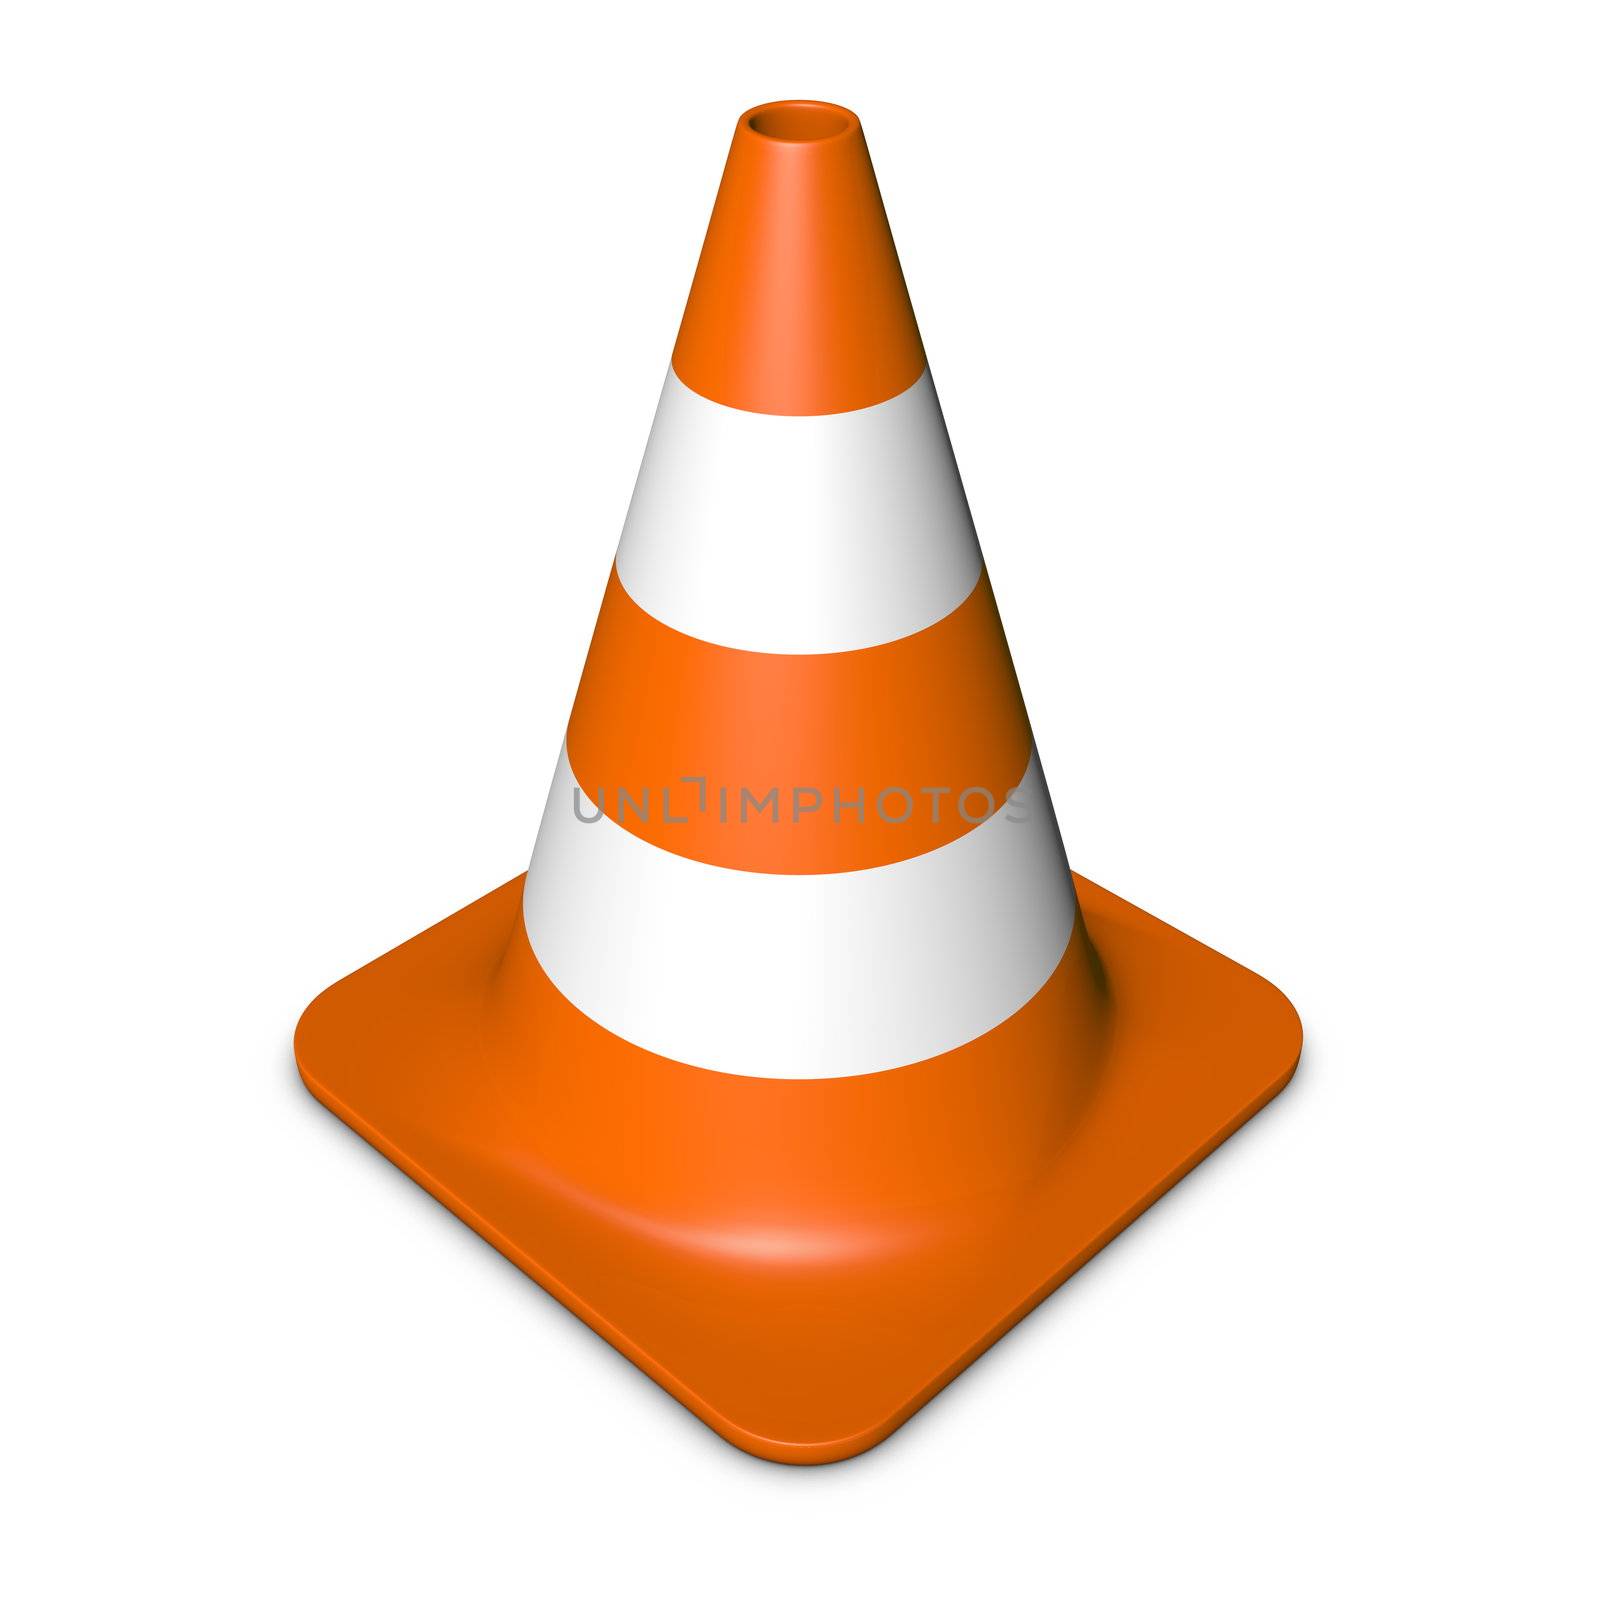 single traffic in 3d with orange and white stripes